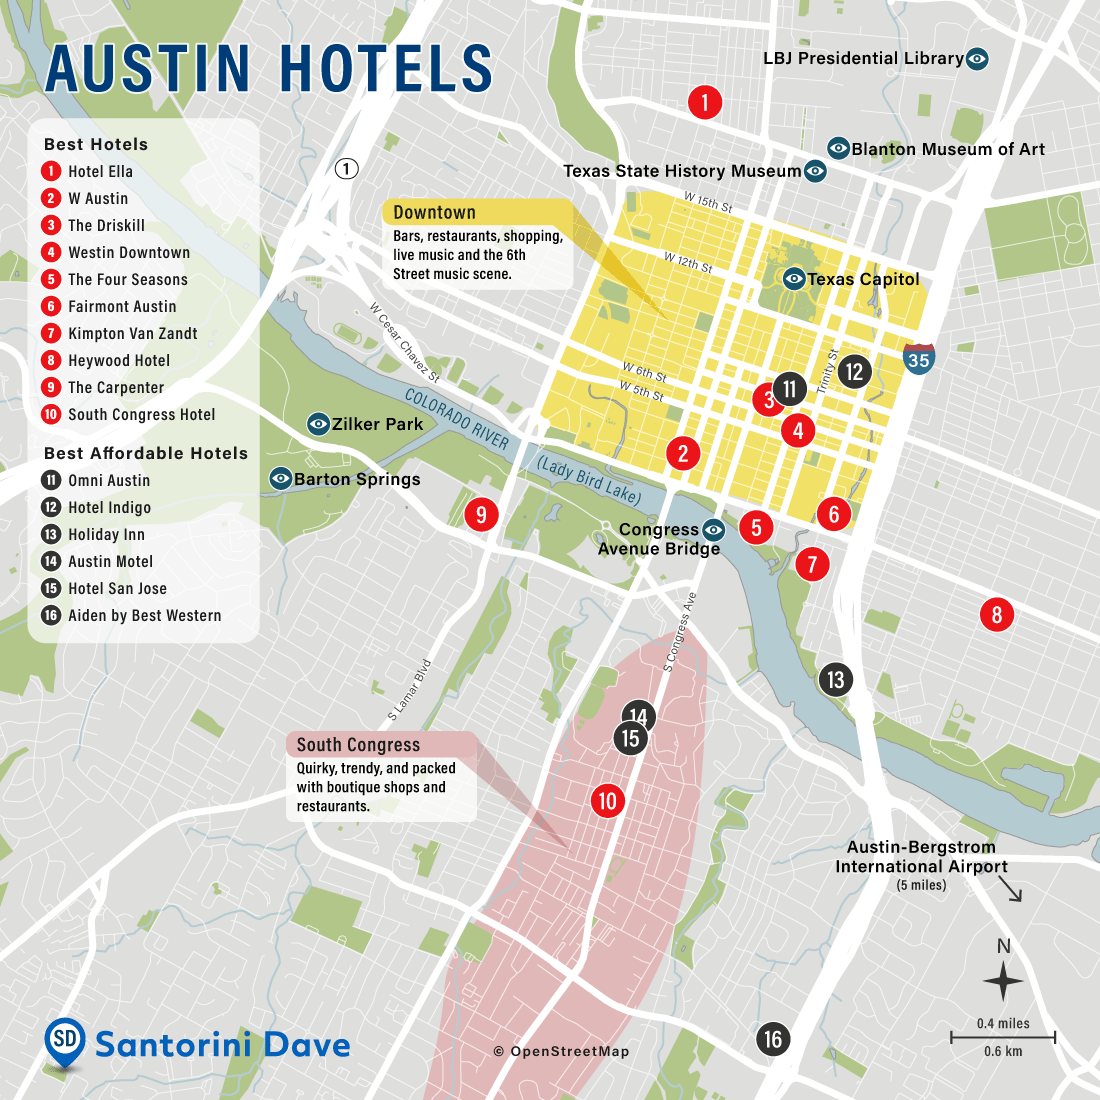 Map of Austin Hotels and Neighborhoods.